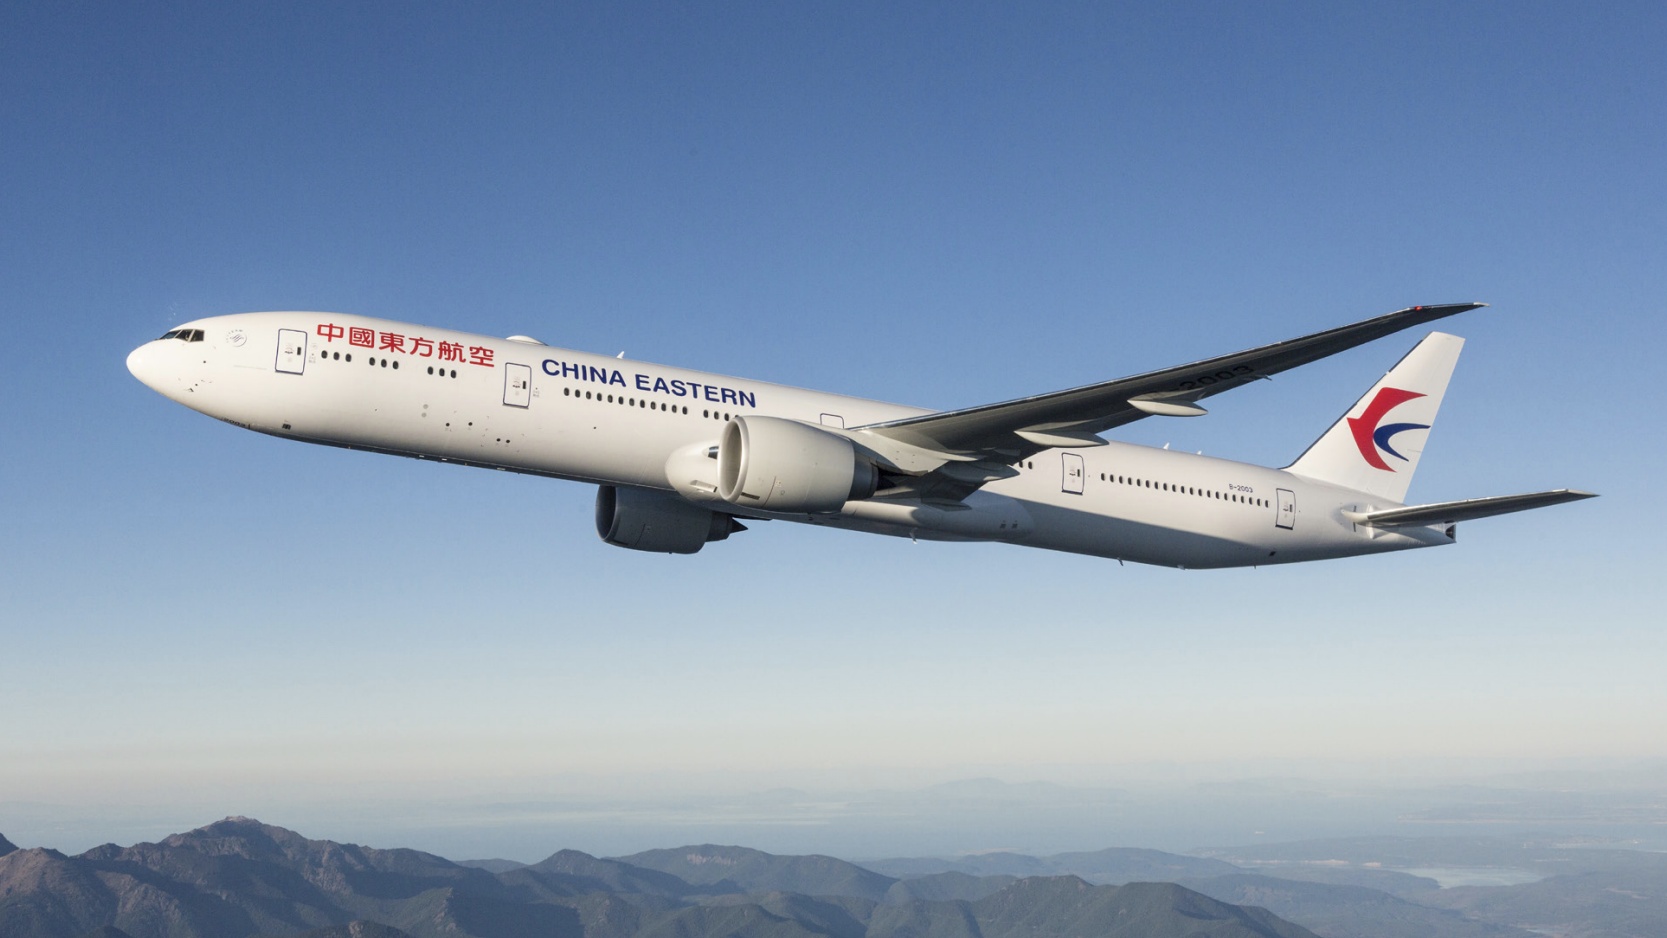 a-guide-to-redeeming-qantas-points-for-china-eastern-flights-point-hacks